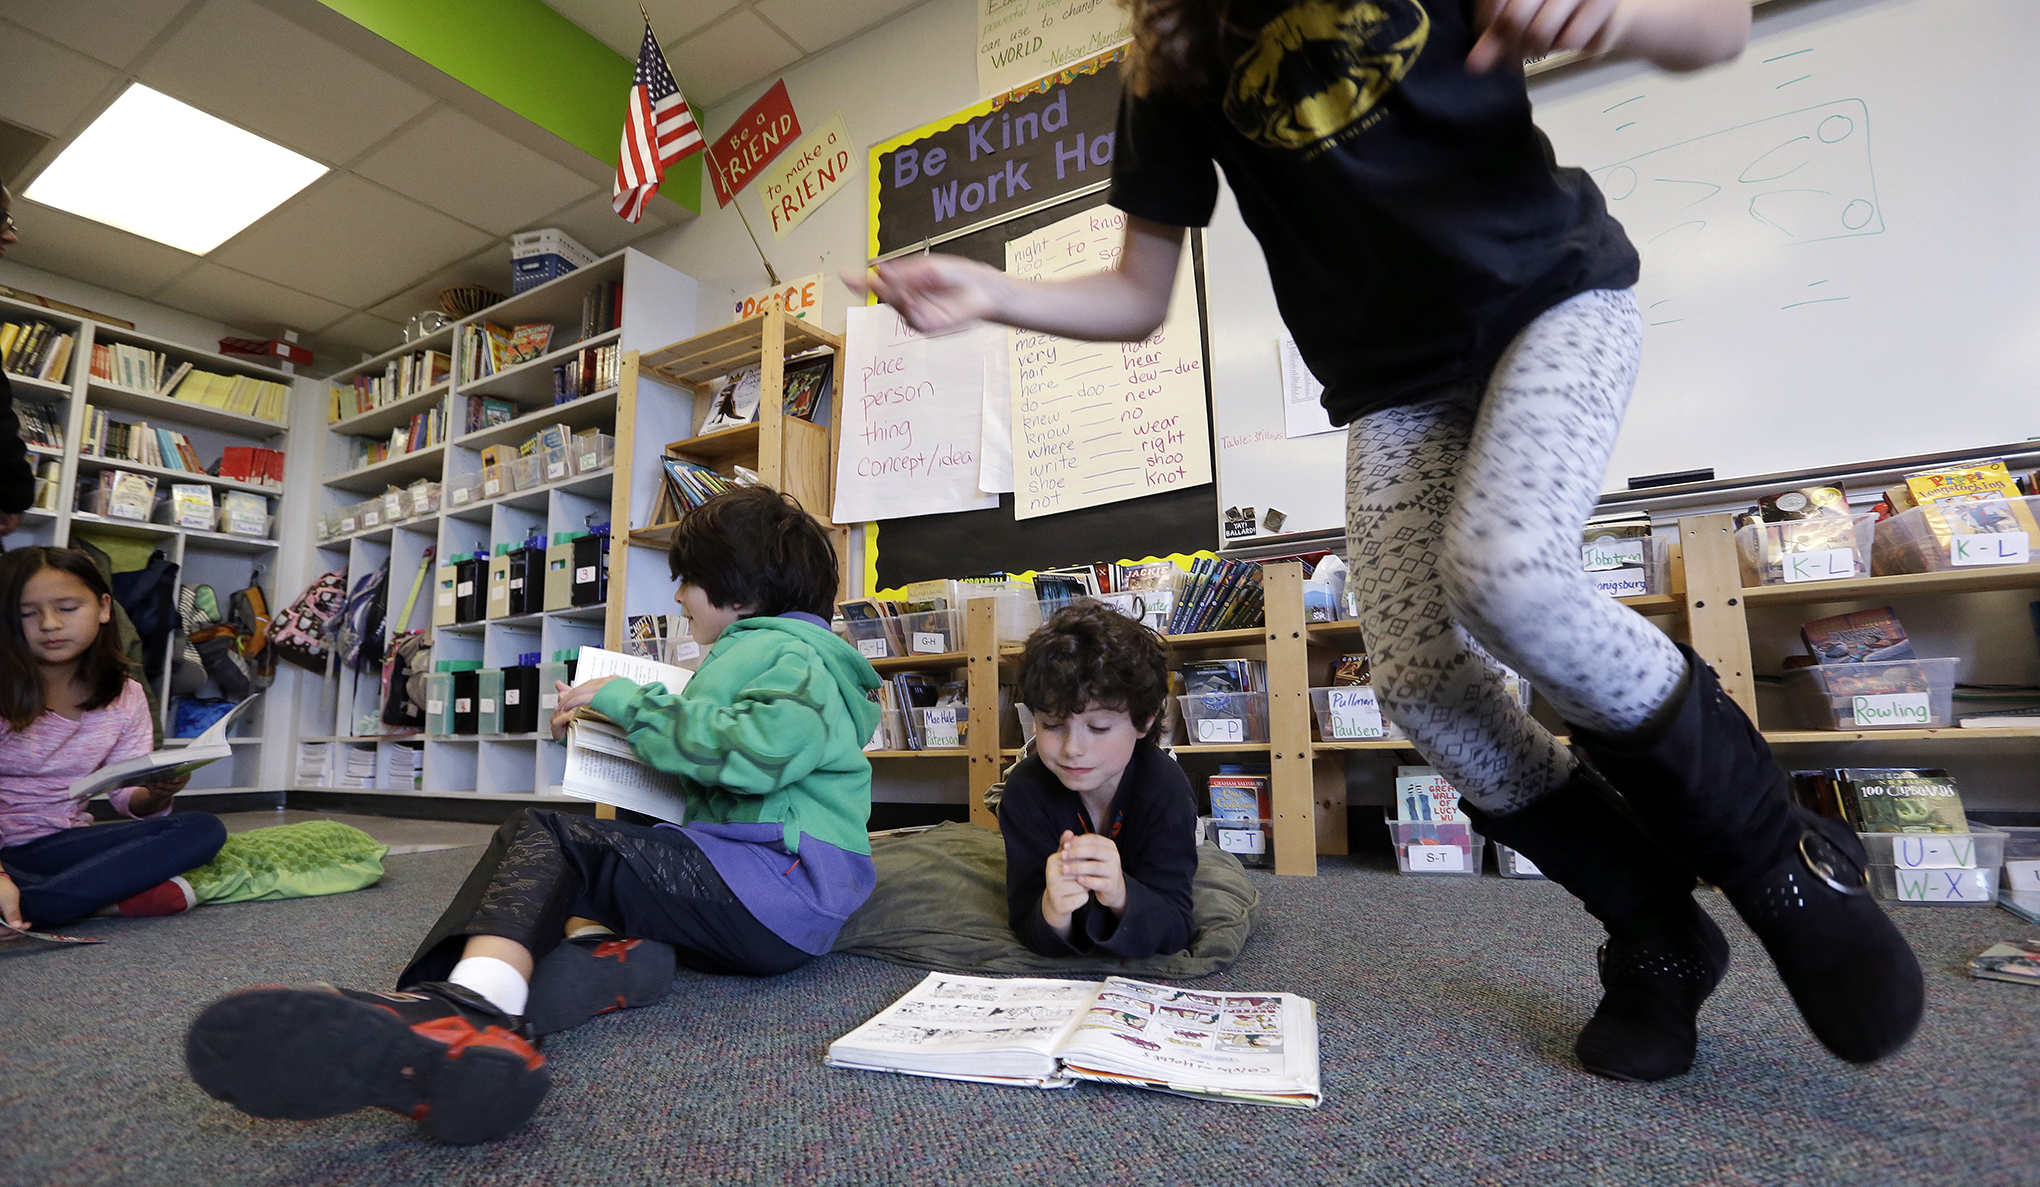 Wisconsin students still majoring in education, but teacher retention is down